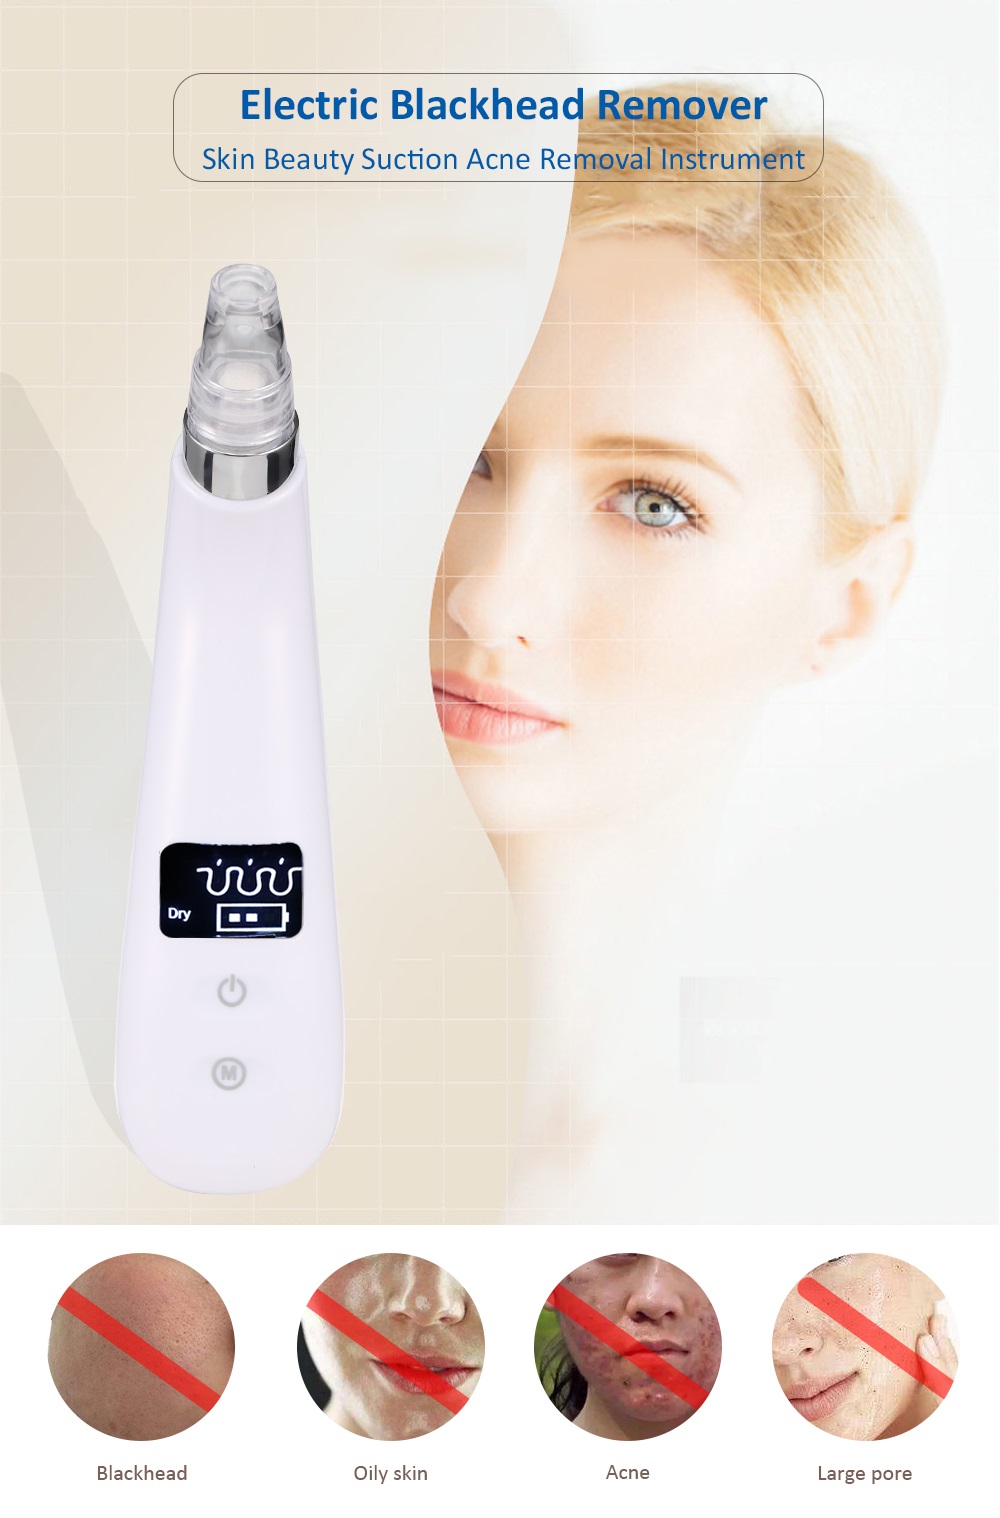 Electric Blackhead Remover Skin Beauty Suction Acne Removal Instrument